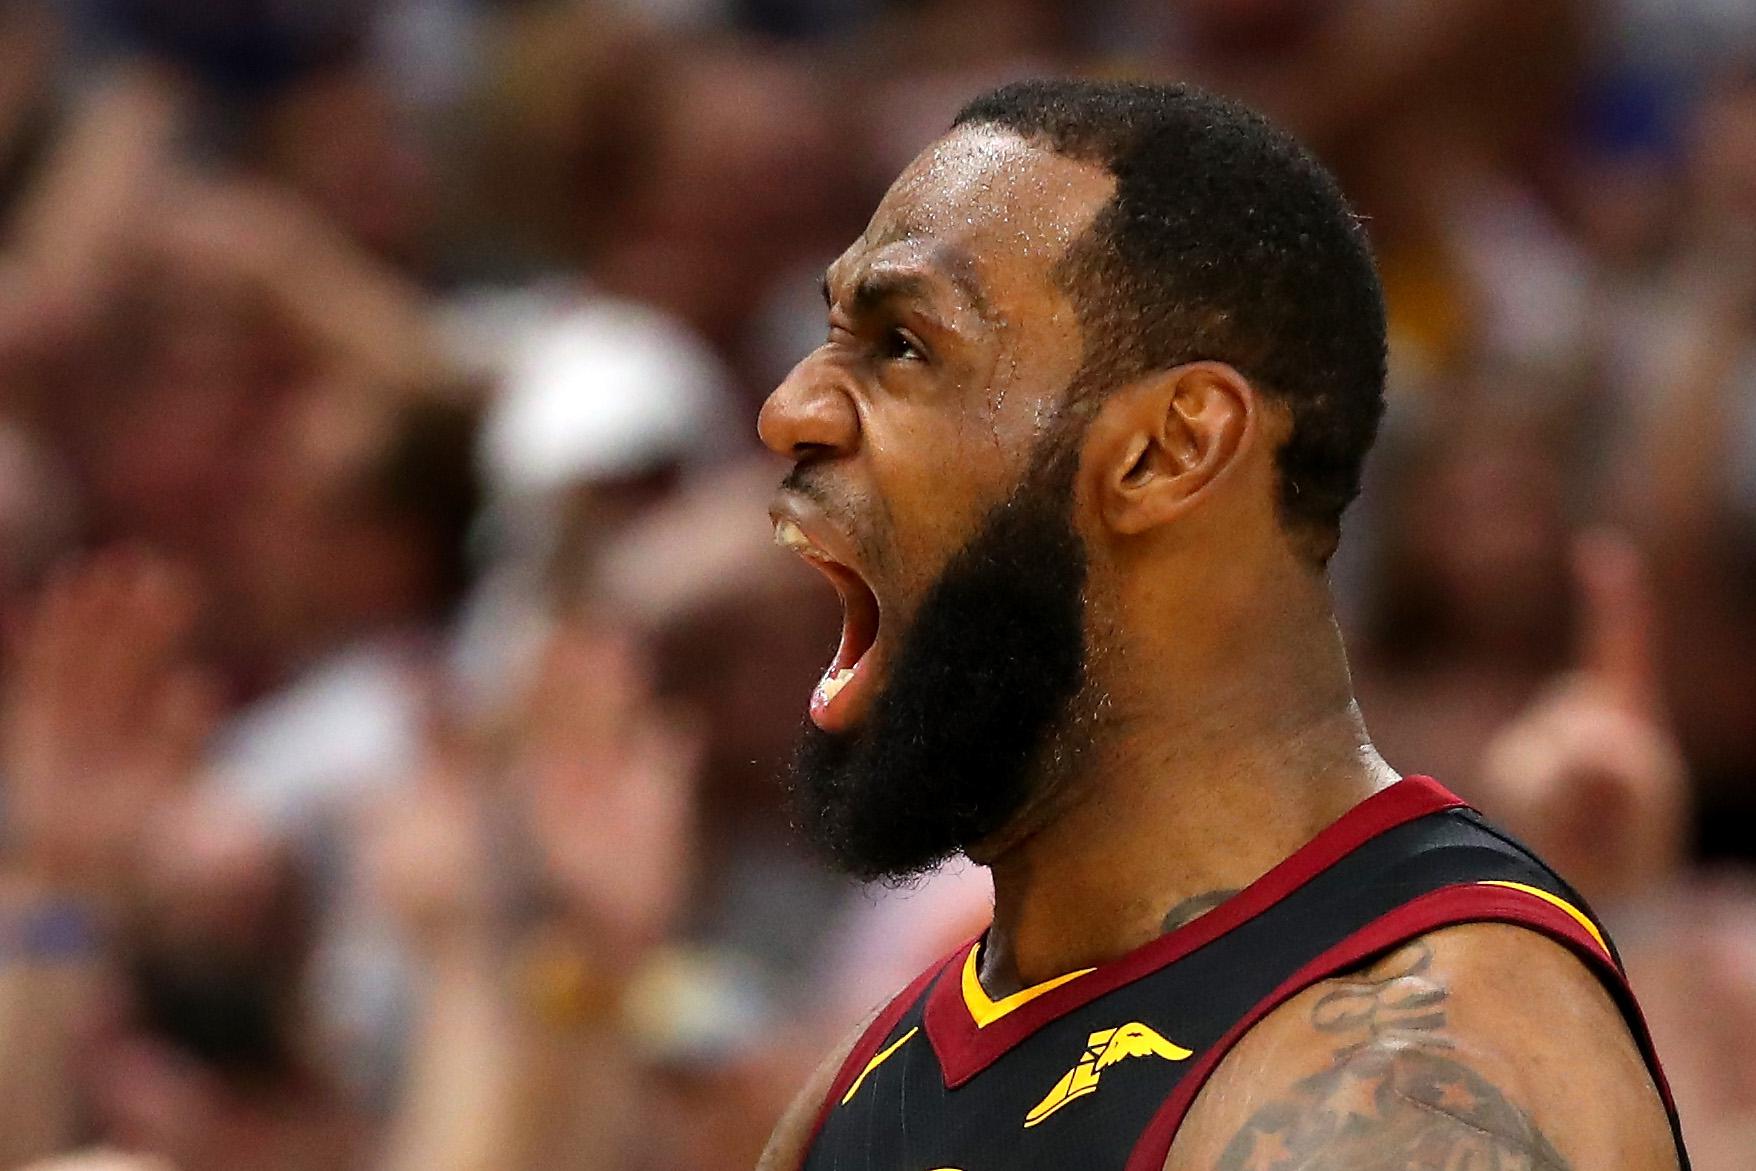 CLEVELAND, OH - MAY 25:  LeBron James of the Cleveland Cavaliers reacts after a basket in the fourth quarter against the Boston Celtics during Game Six of the 2018 NBA Eastern Conference Finals at Quicken Loans Arena on May 25, 2018 in Cleveland, Ohio. NOTE TO USER: User expressly acknowledges and agrees that, by downloading and or using this photograph, User is consenting to the terms and conditions of the Getty Images License Agreement.  (Photo by Gregory Shamus/Getty Images)